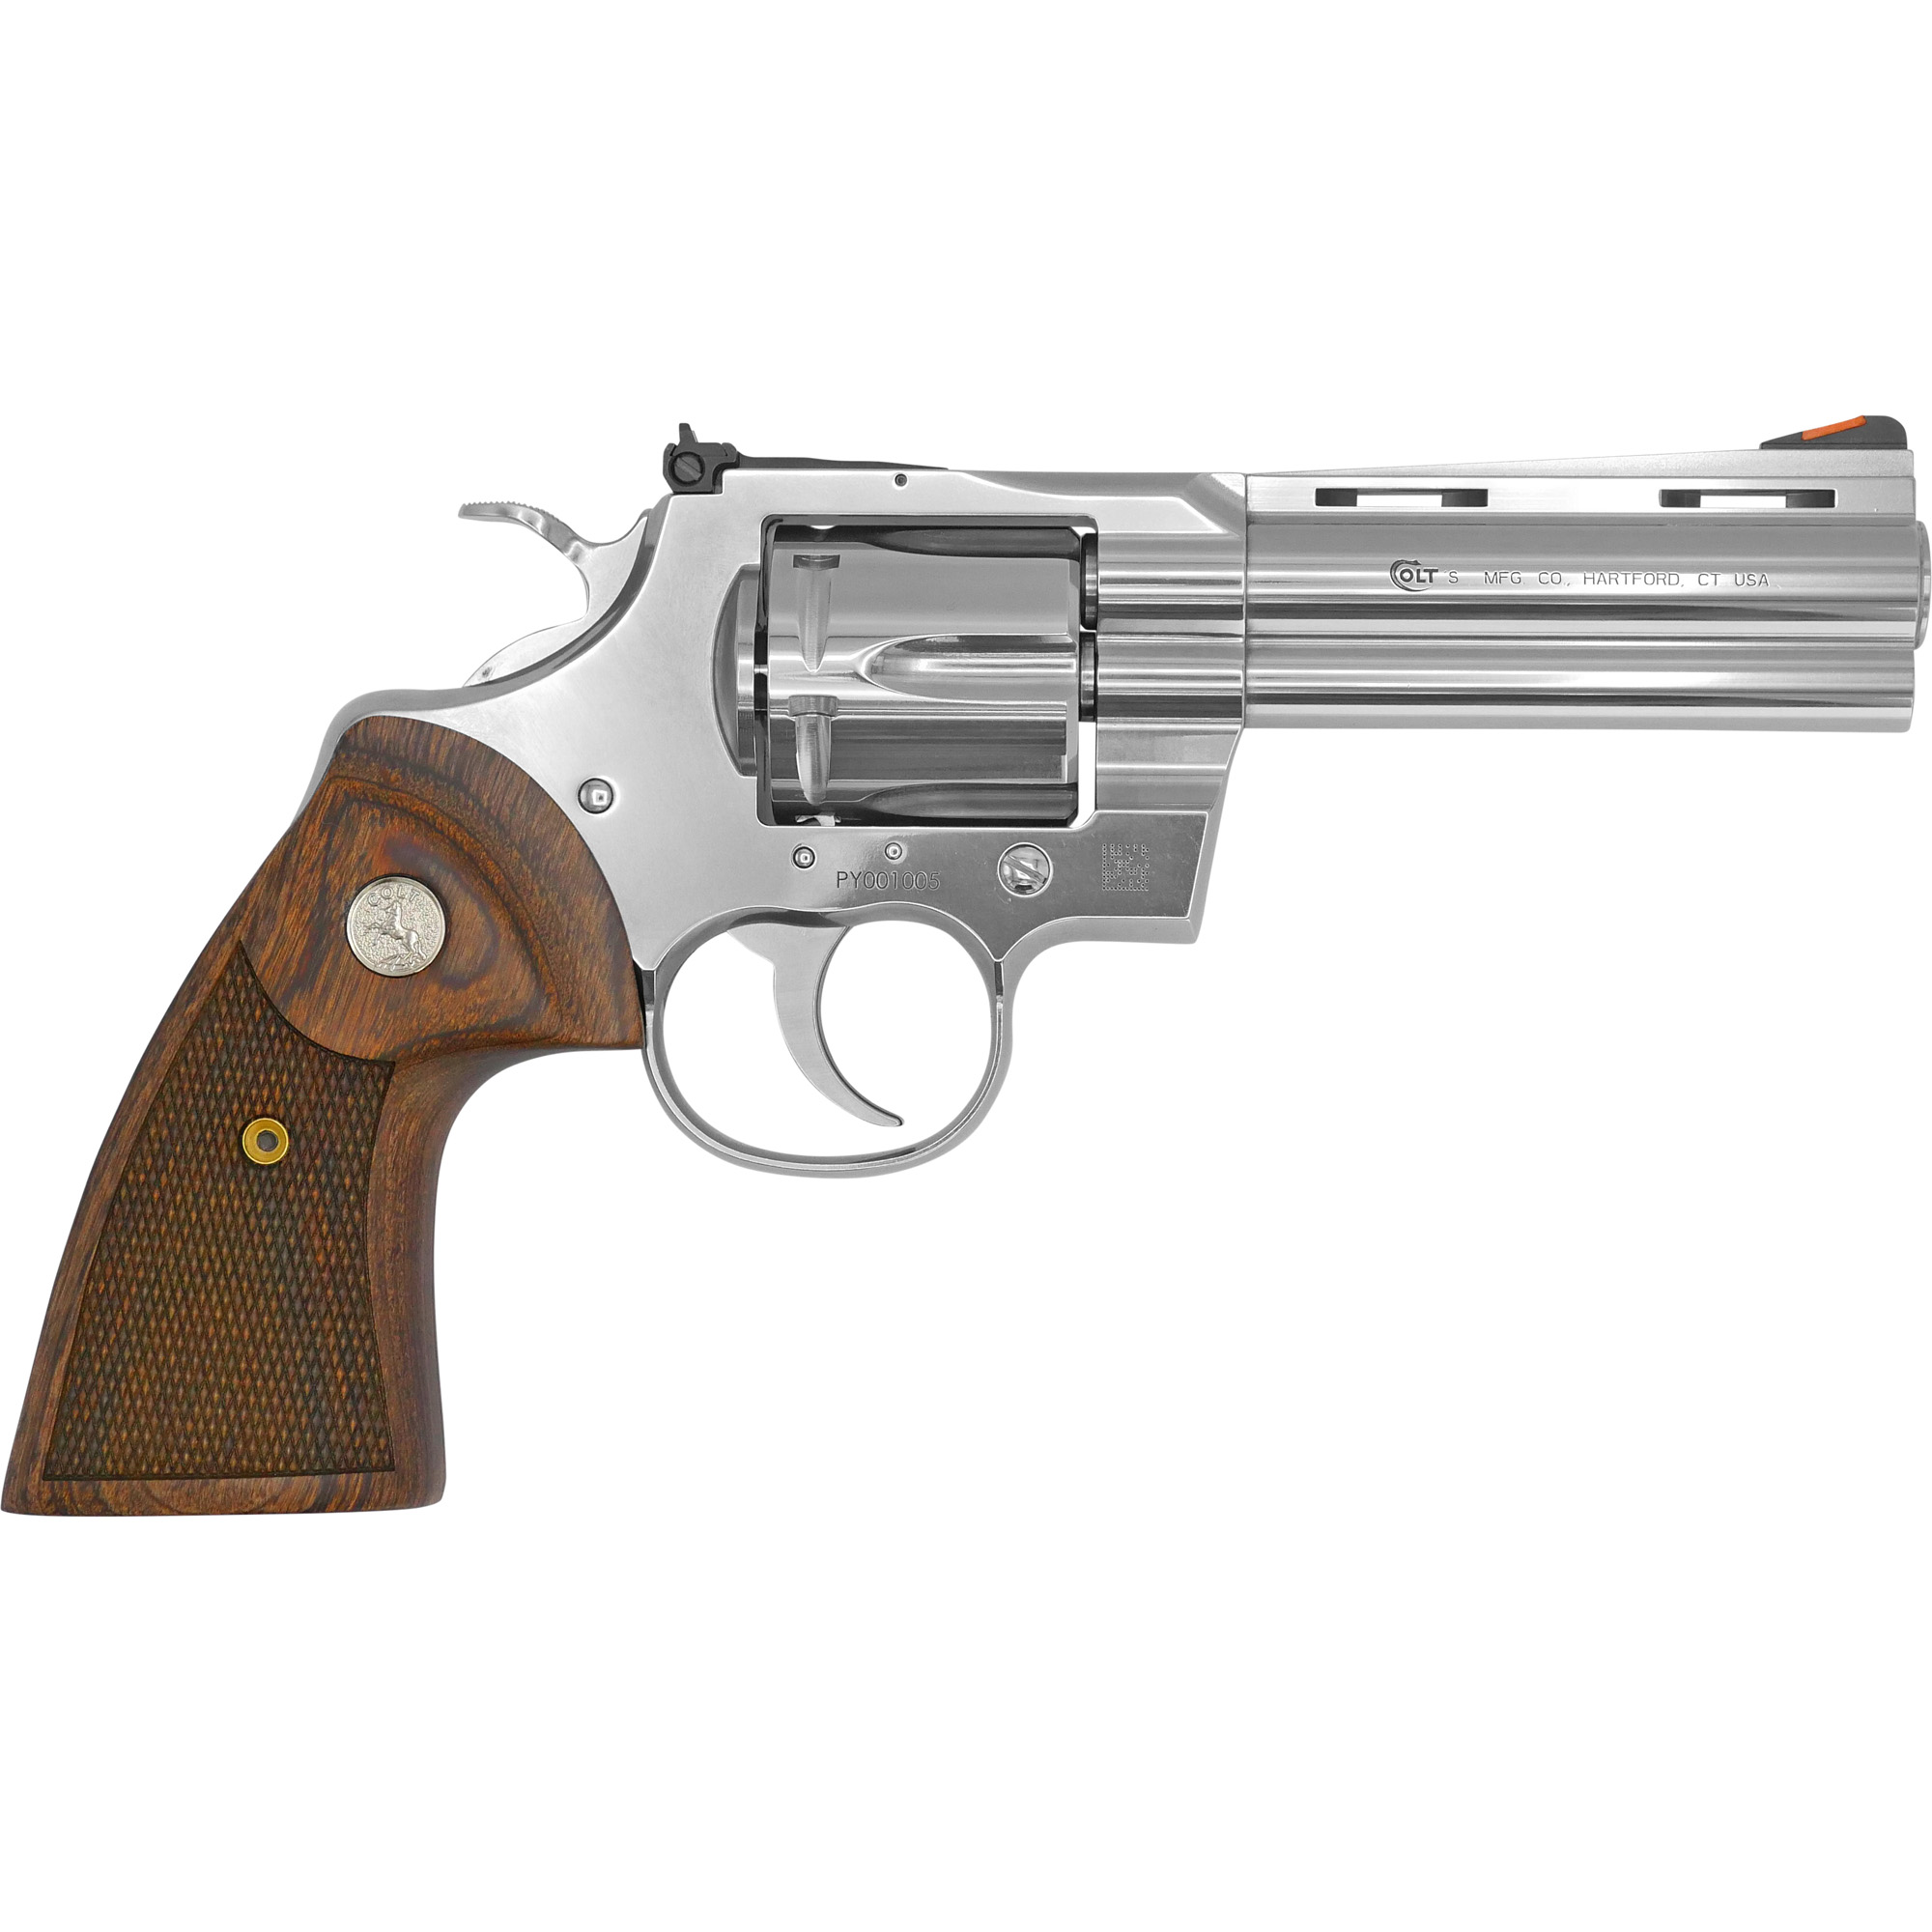 Colt's Manufacturing, Python, Revolver, Double Action Only, 357 Magnum, 4.25" Barrel, Steel, Stainless Finish, Walnut Grips, Red Ramp Front/Adjustable Rear Sight, 6 Rounds